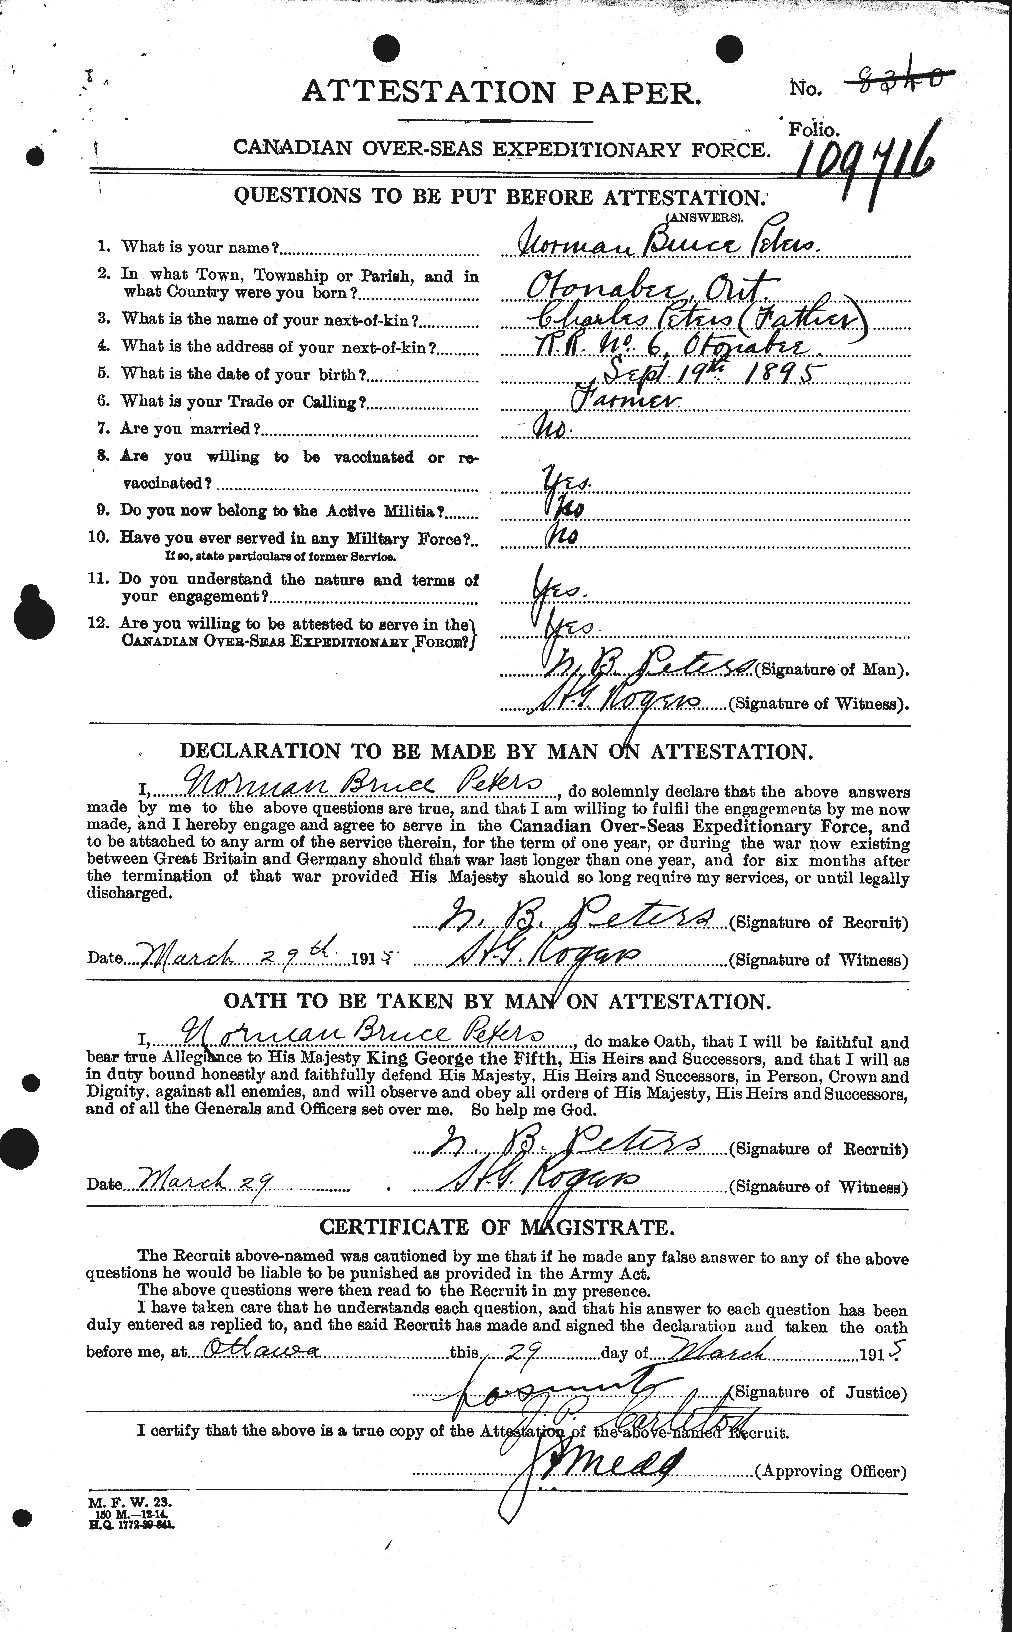 Personnel Records of the First World War - CEF 575588a